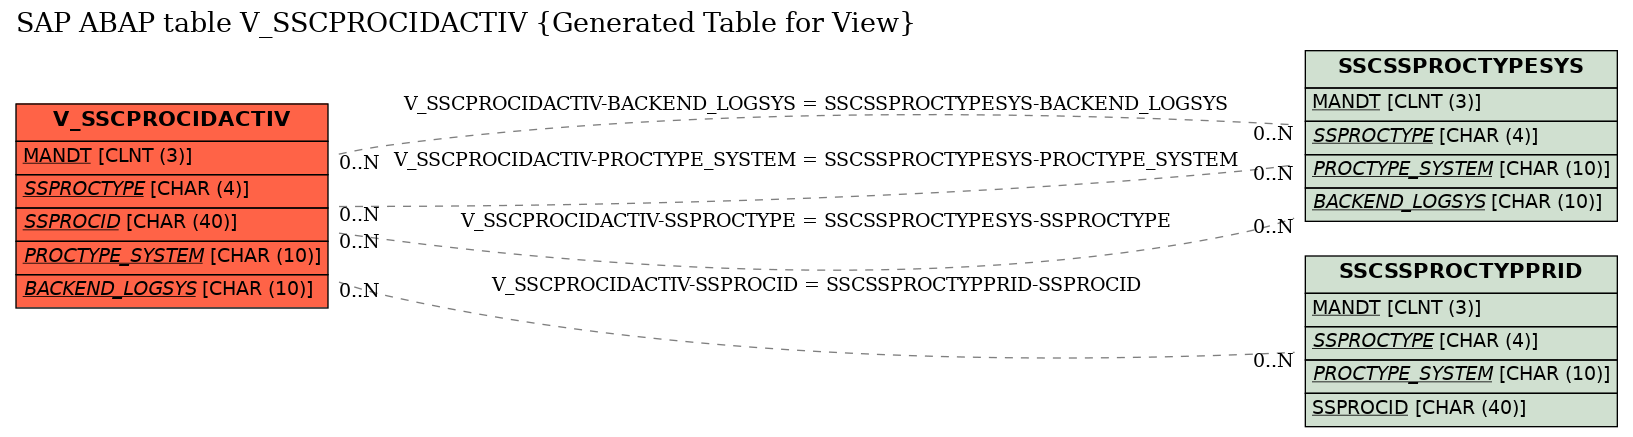 E-R Diagram for table V_SSCPROCIDACTIV (Generated Table for View)